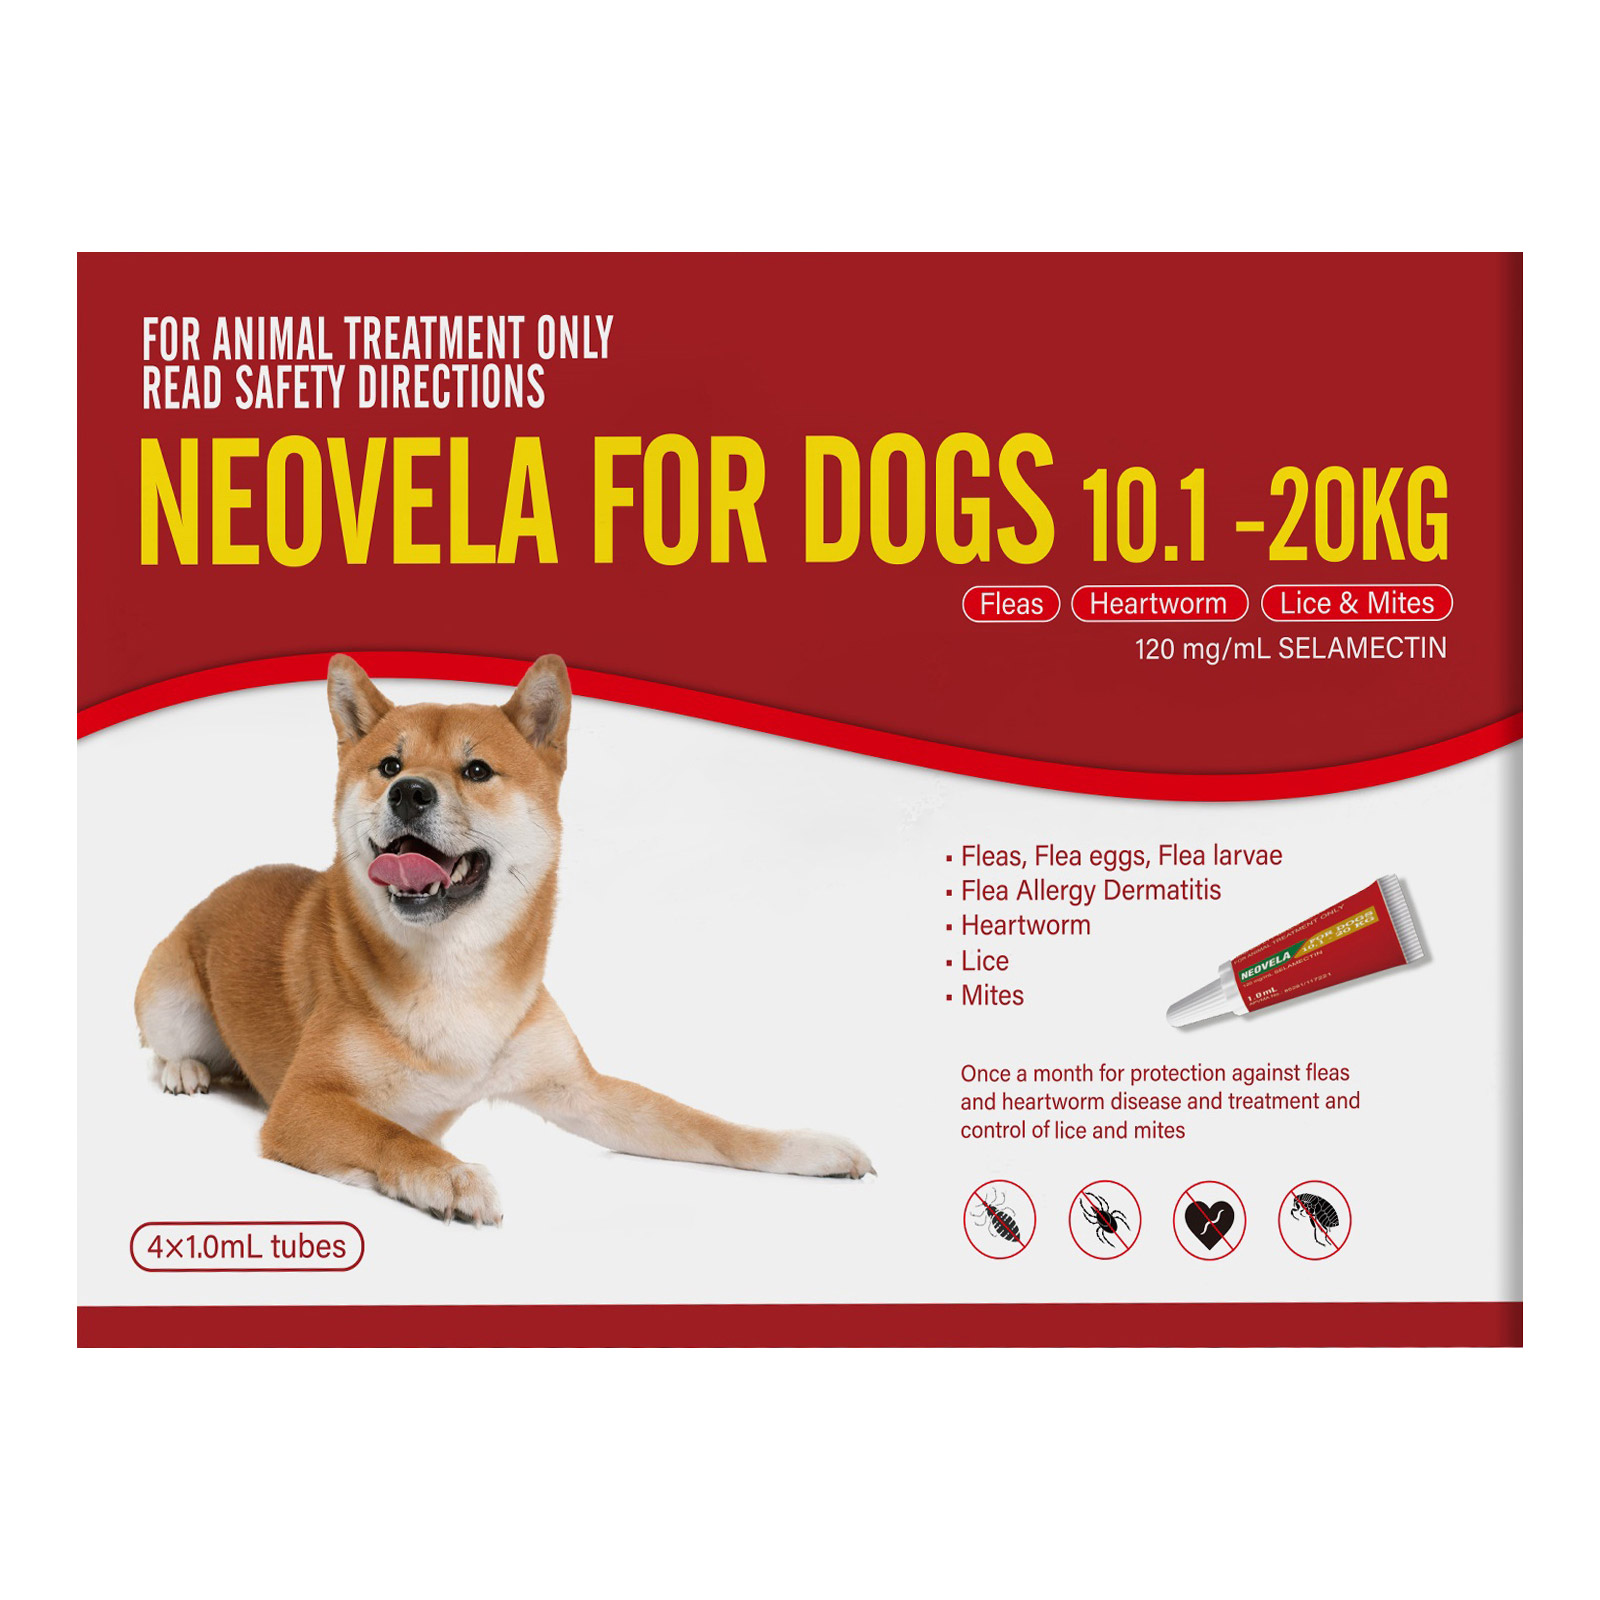 Neovela (Selamectin) Flea and Worming For Dogs 10 - 20 Kg Red